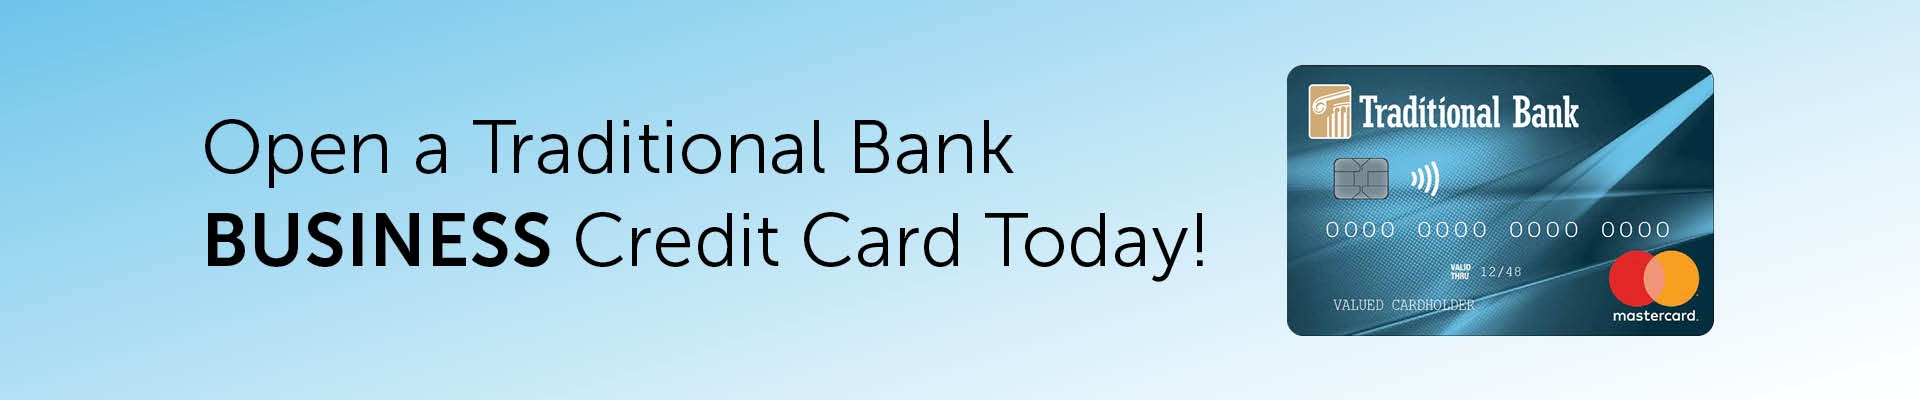 Open a Traditional Bank Business Credit Card Today with picture of sample credit card Banner